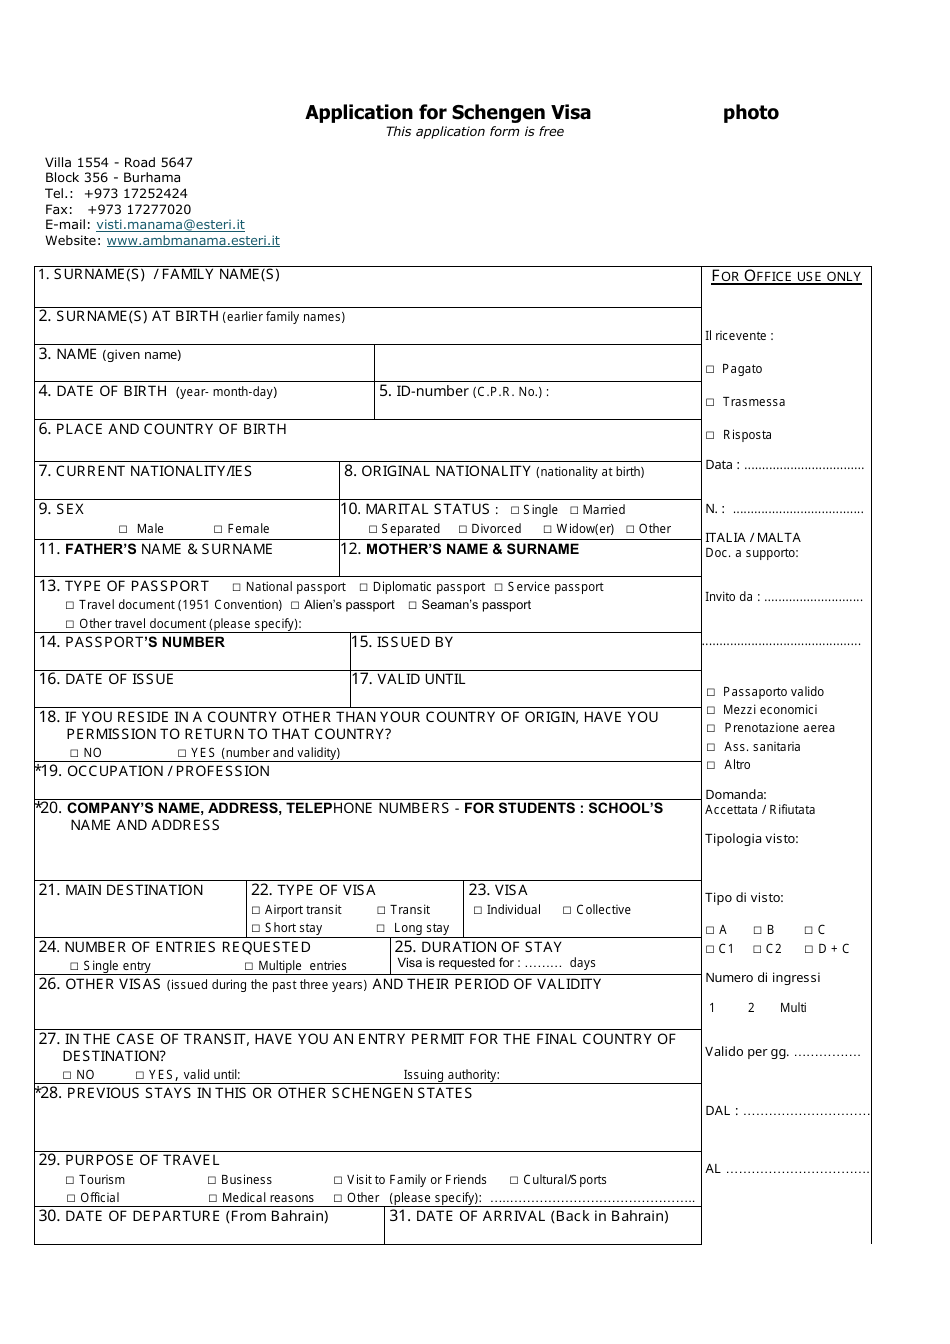 Application Form for Schengen Visa - Embassy of Italy in Manama, Page 1